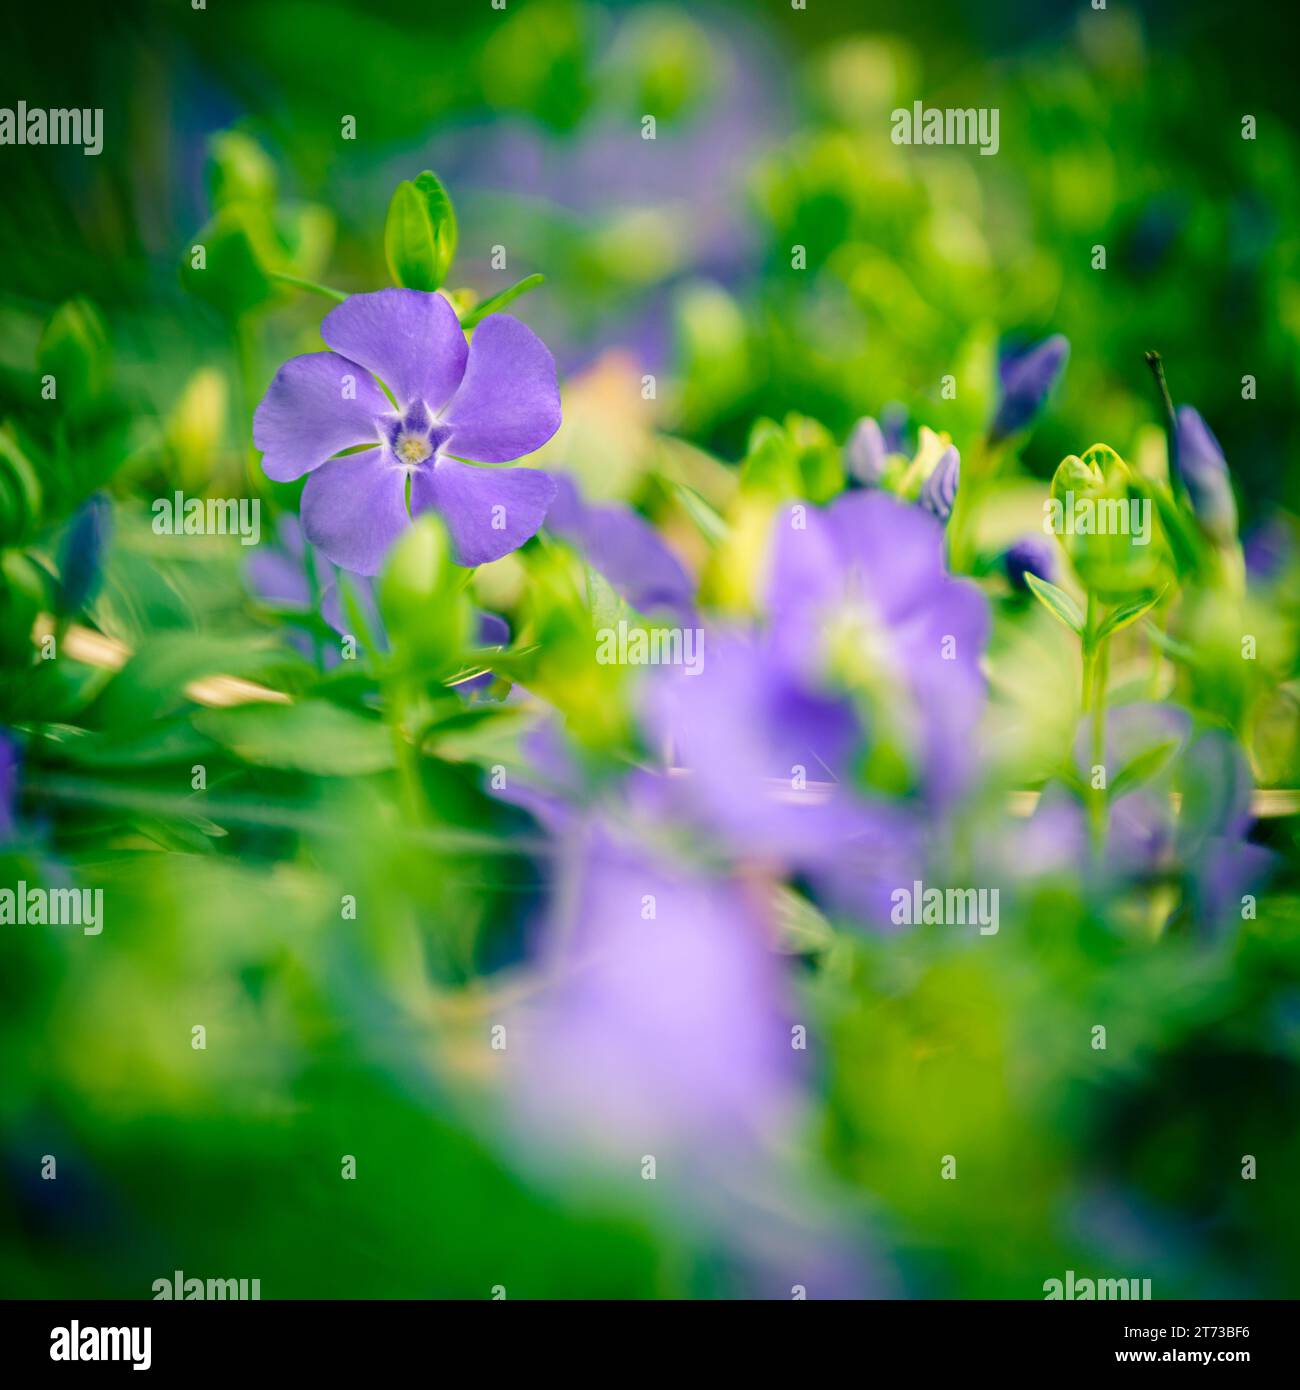 Close-up image of blooming Creeping Myrtle or Periwinkle Stock Photo